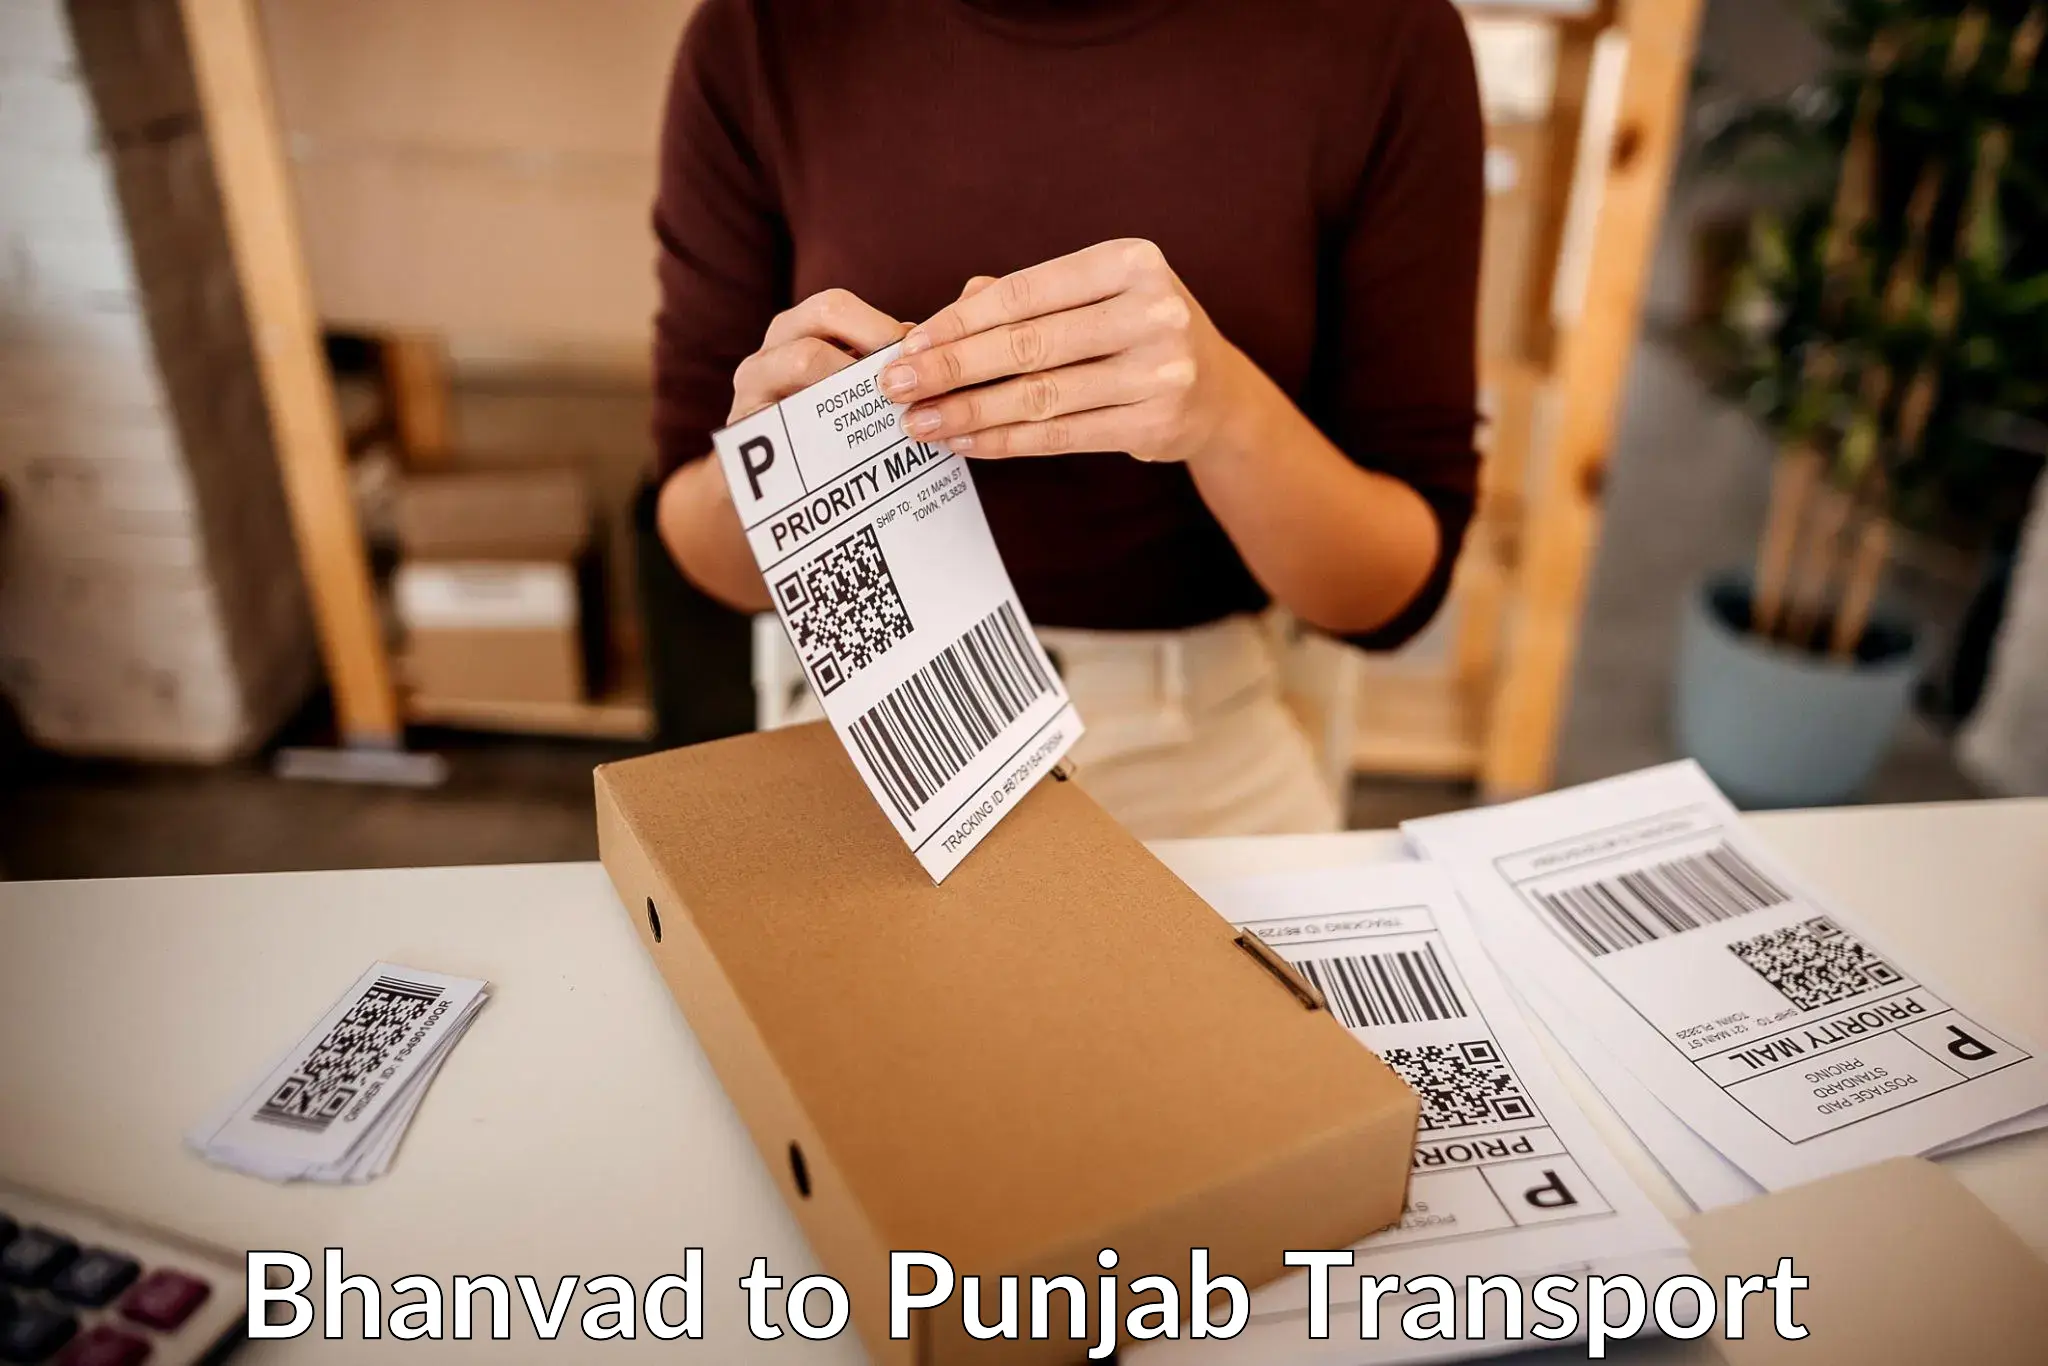 Transport in sharing Bhanvad to Patiala